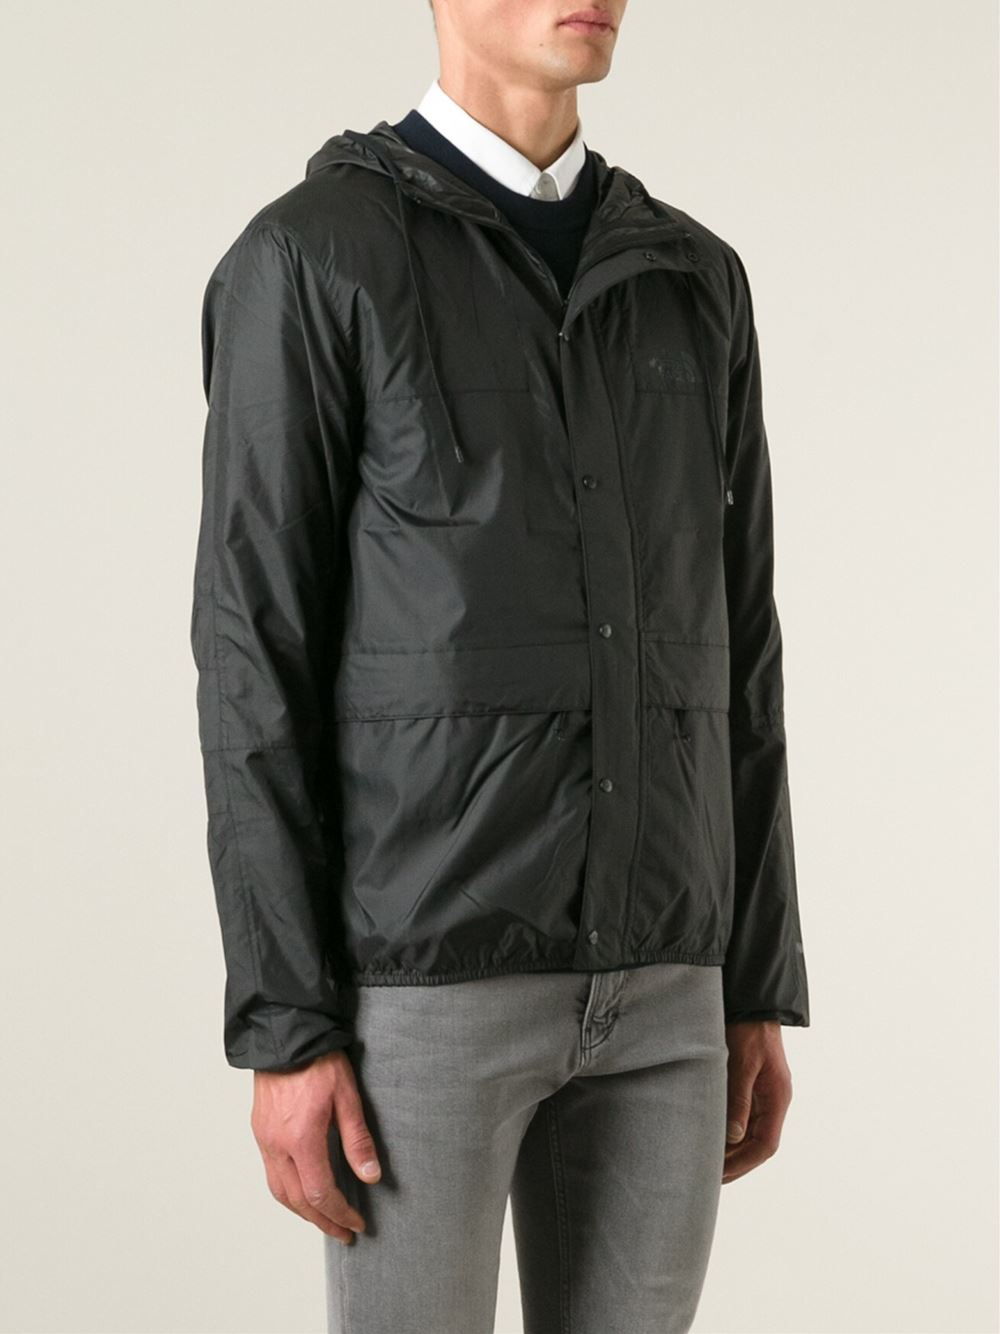 Lyst - The North Face Hooded Windbreaker Jacket in Black for Men